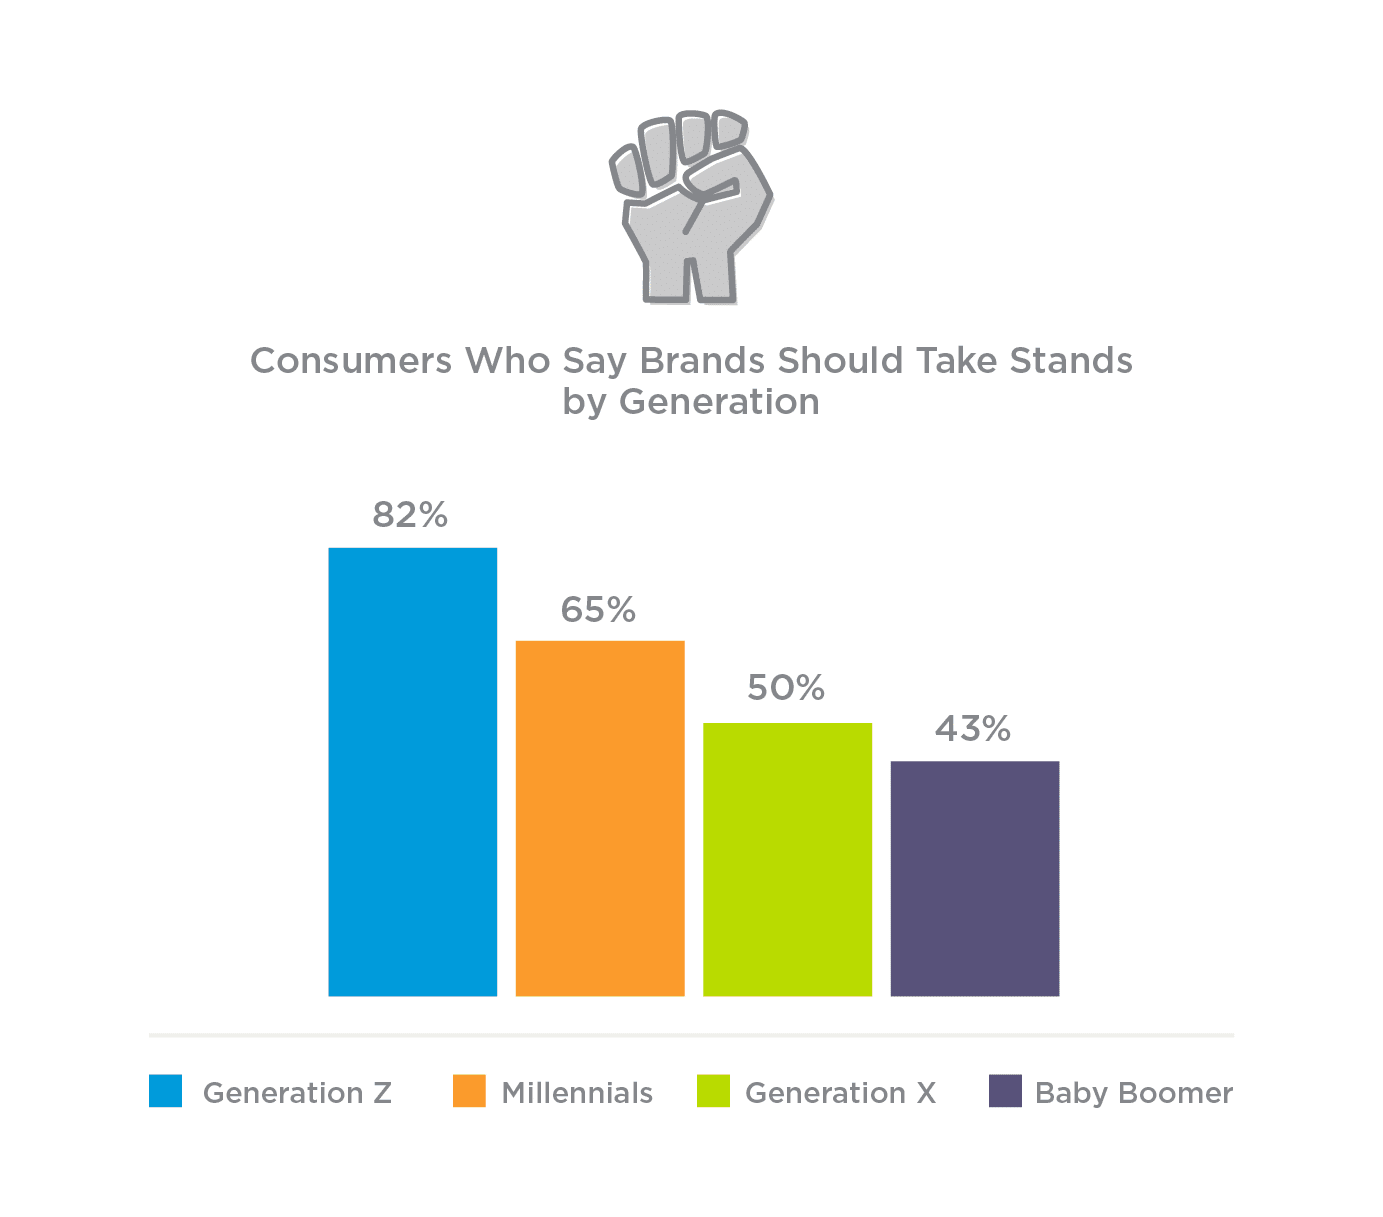 Consumers who say brands should take stands by Generation